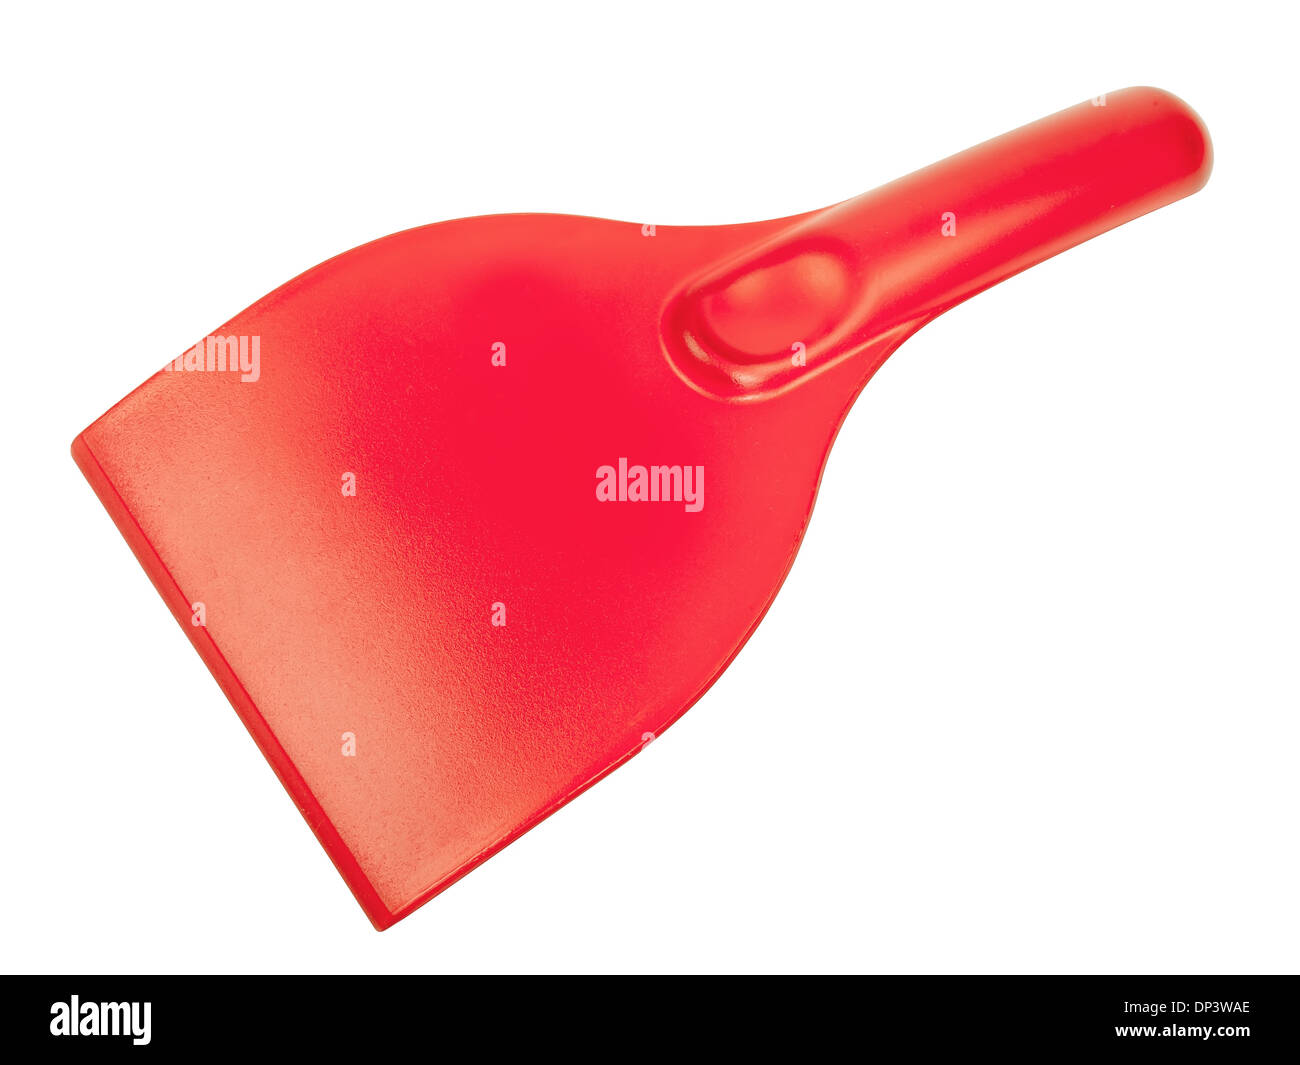 red plastic ice scraper isolated on white background Stock Photo